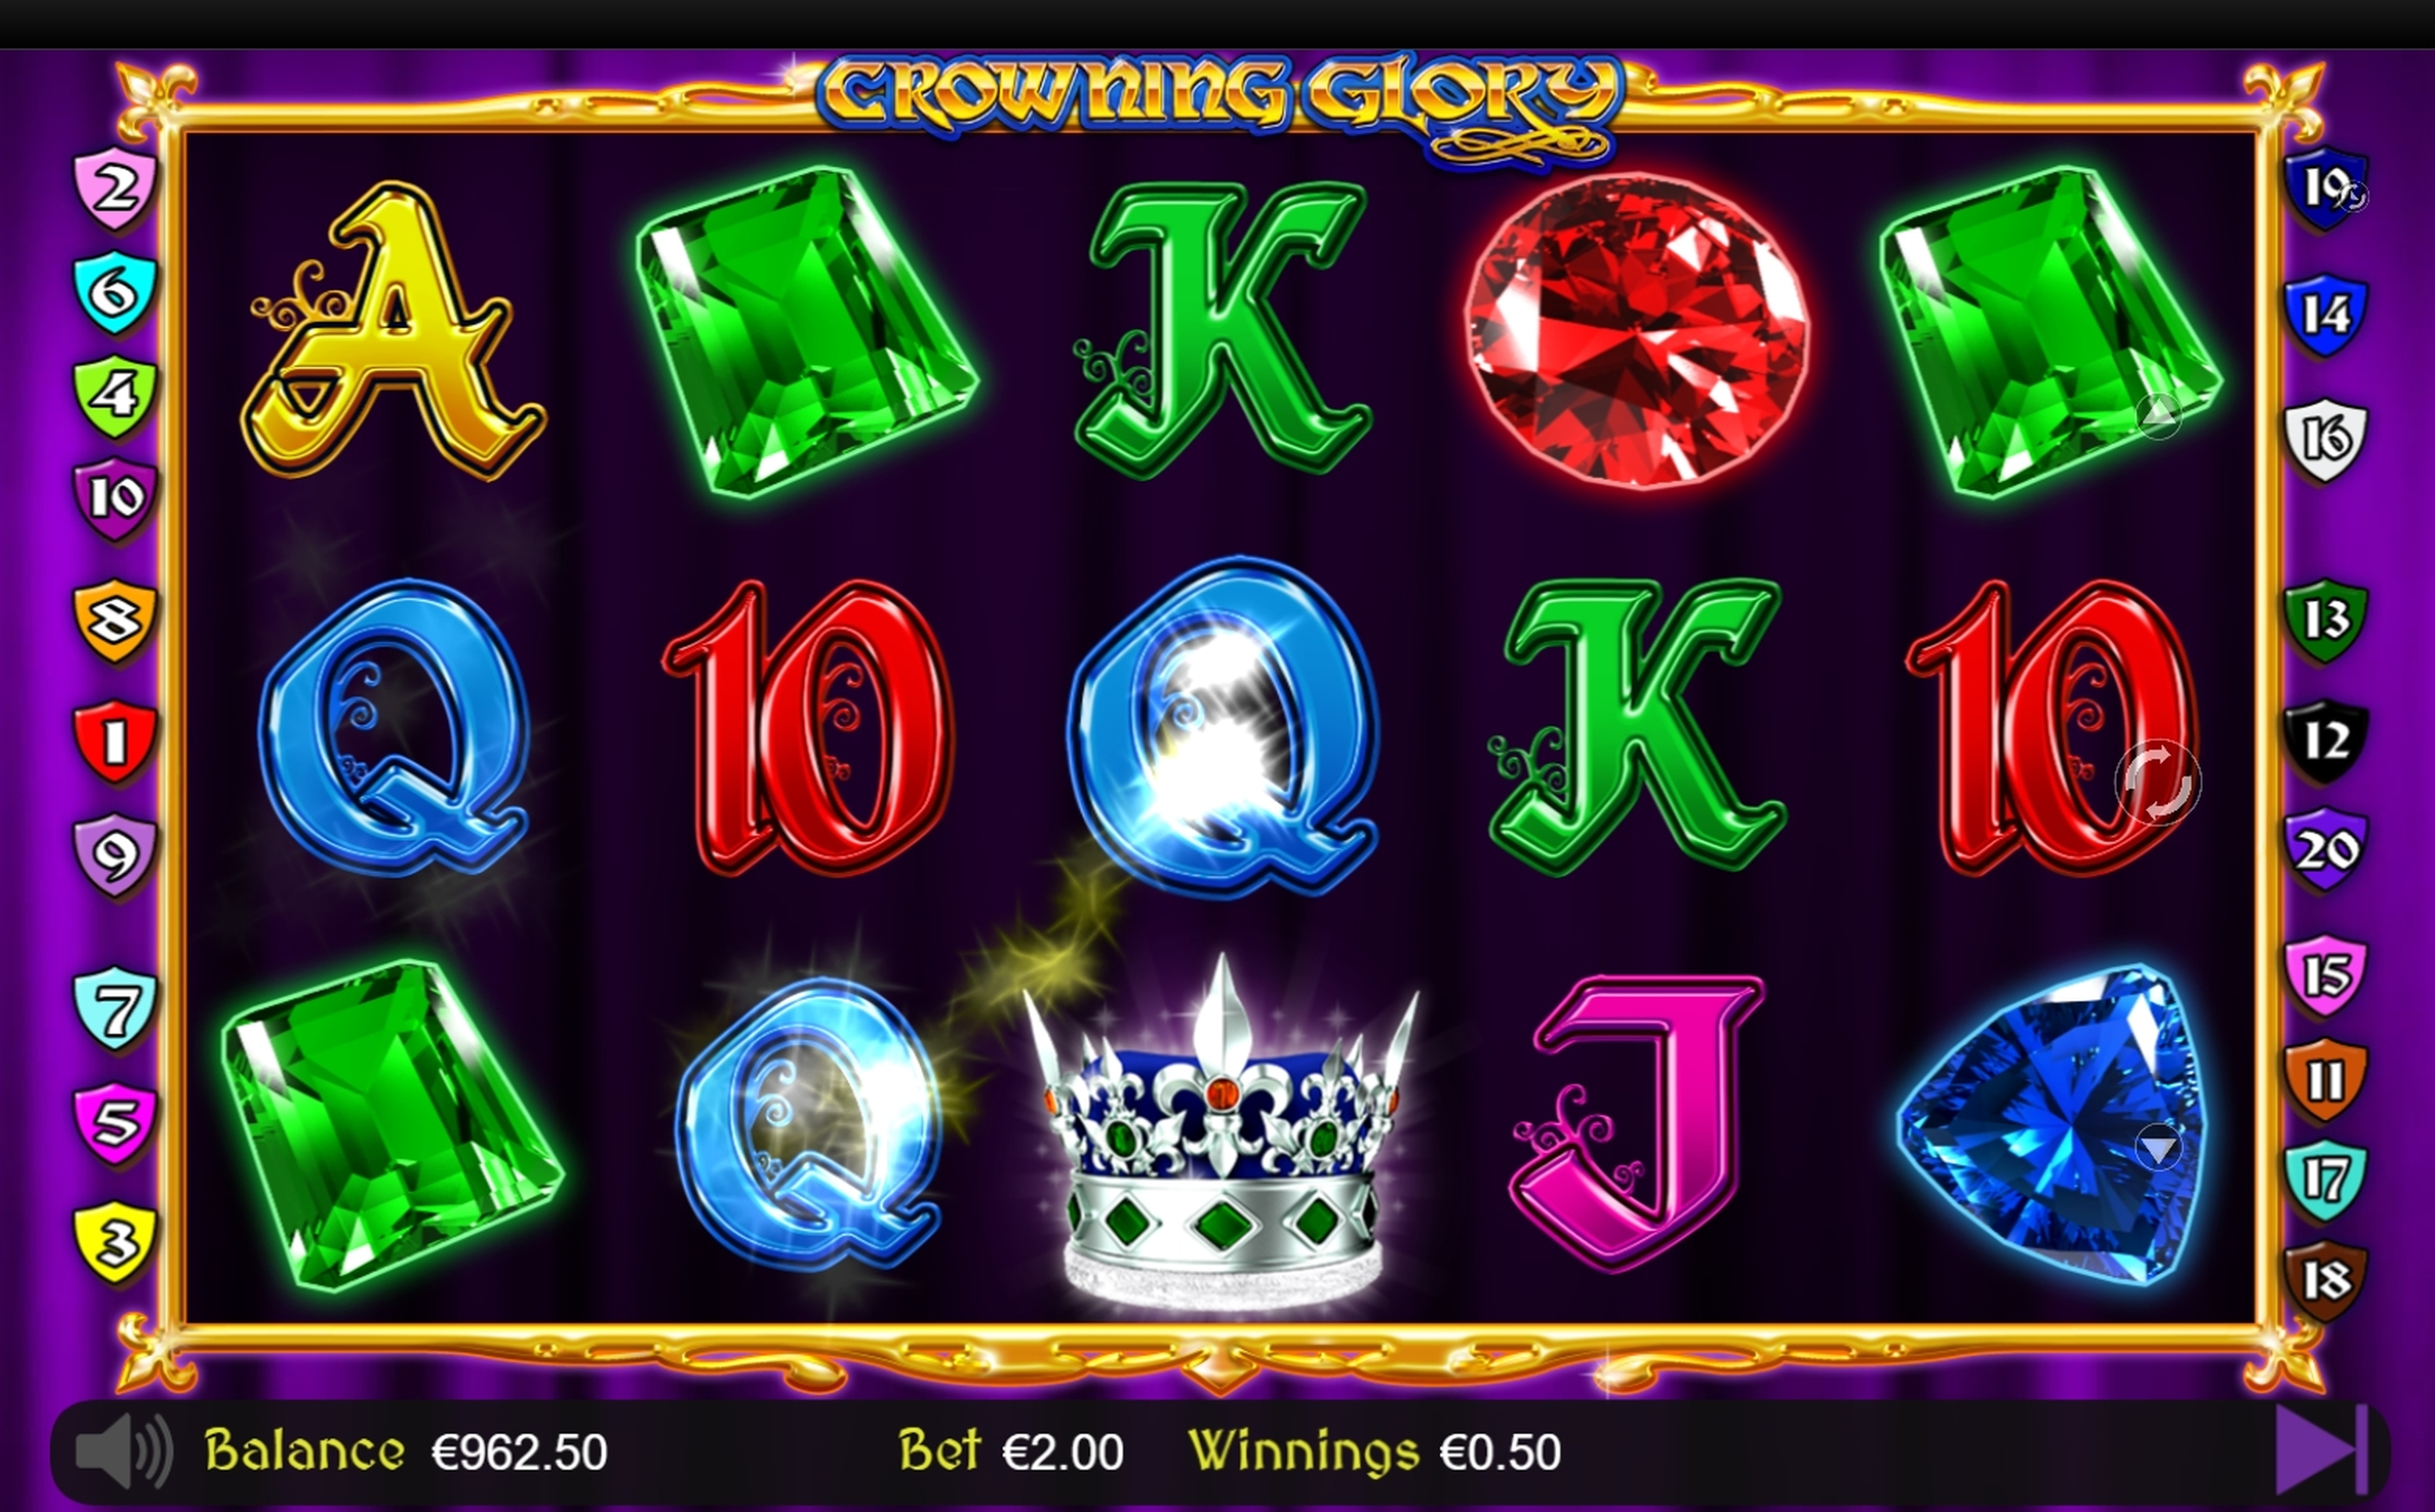 Win Money in Crowning Glory Free Slot Game by Betdigital